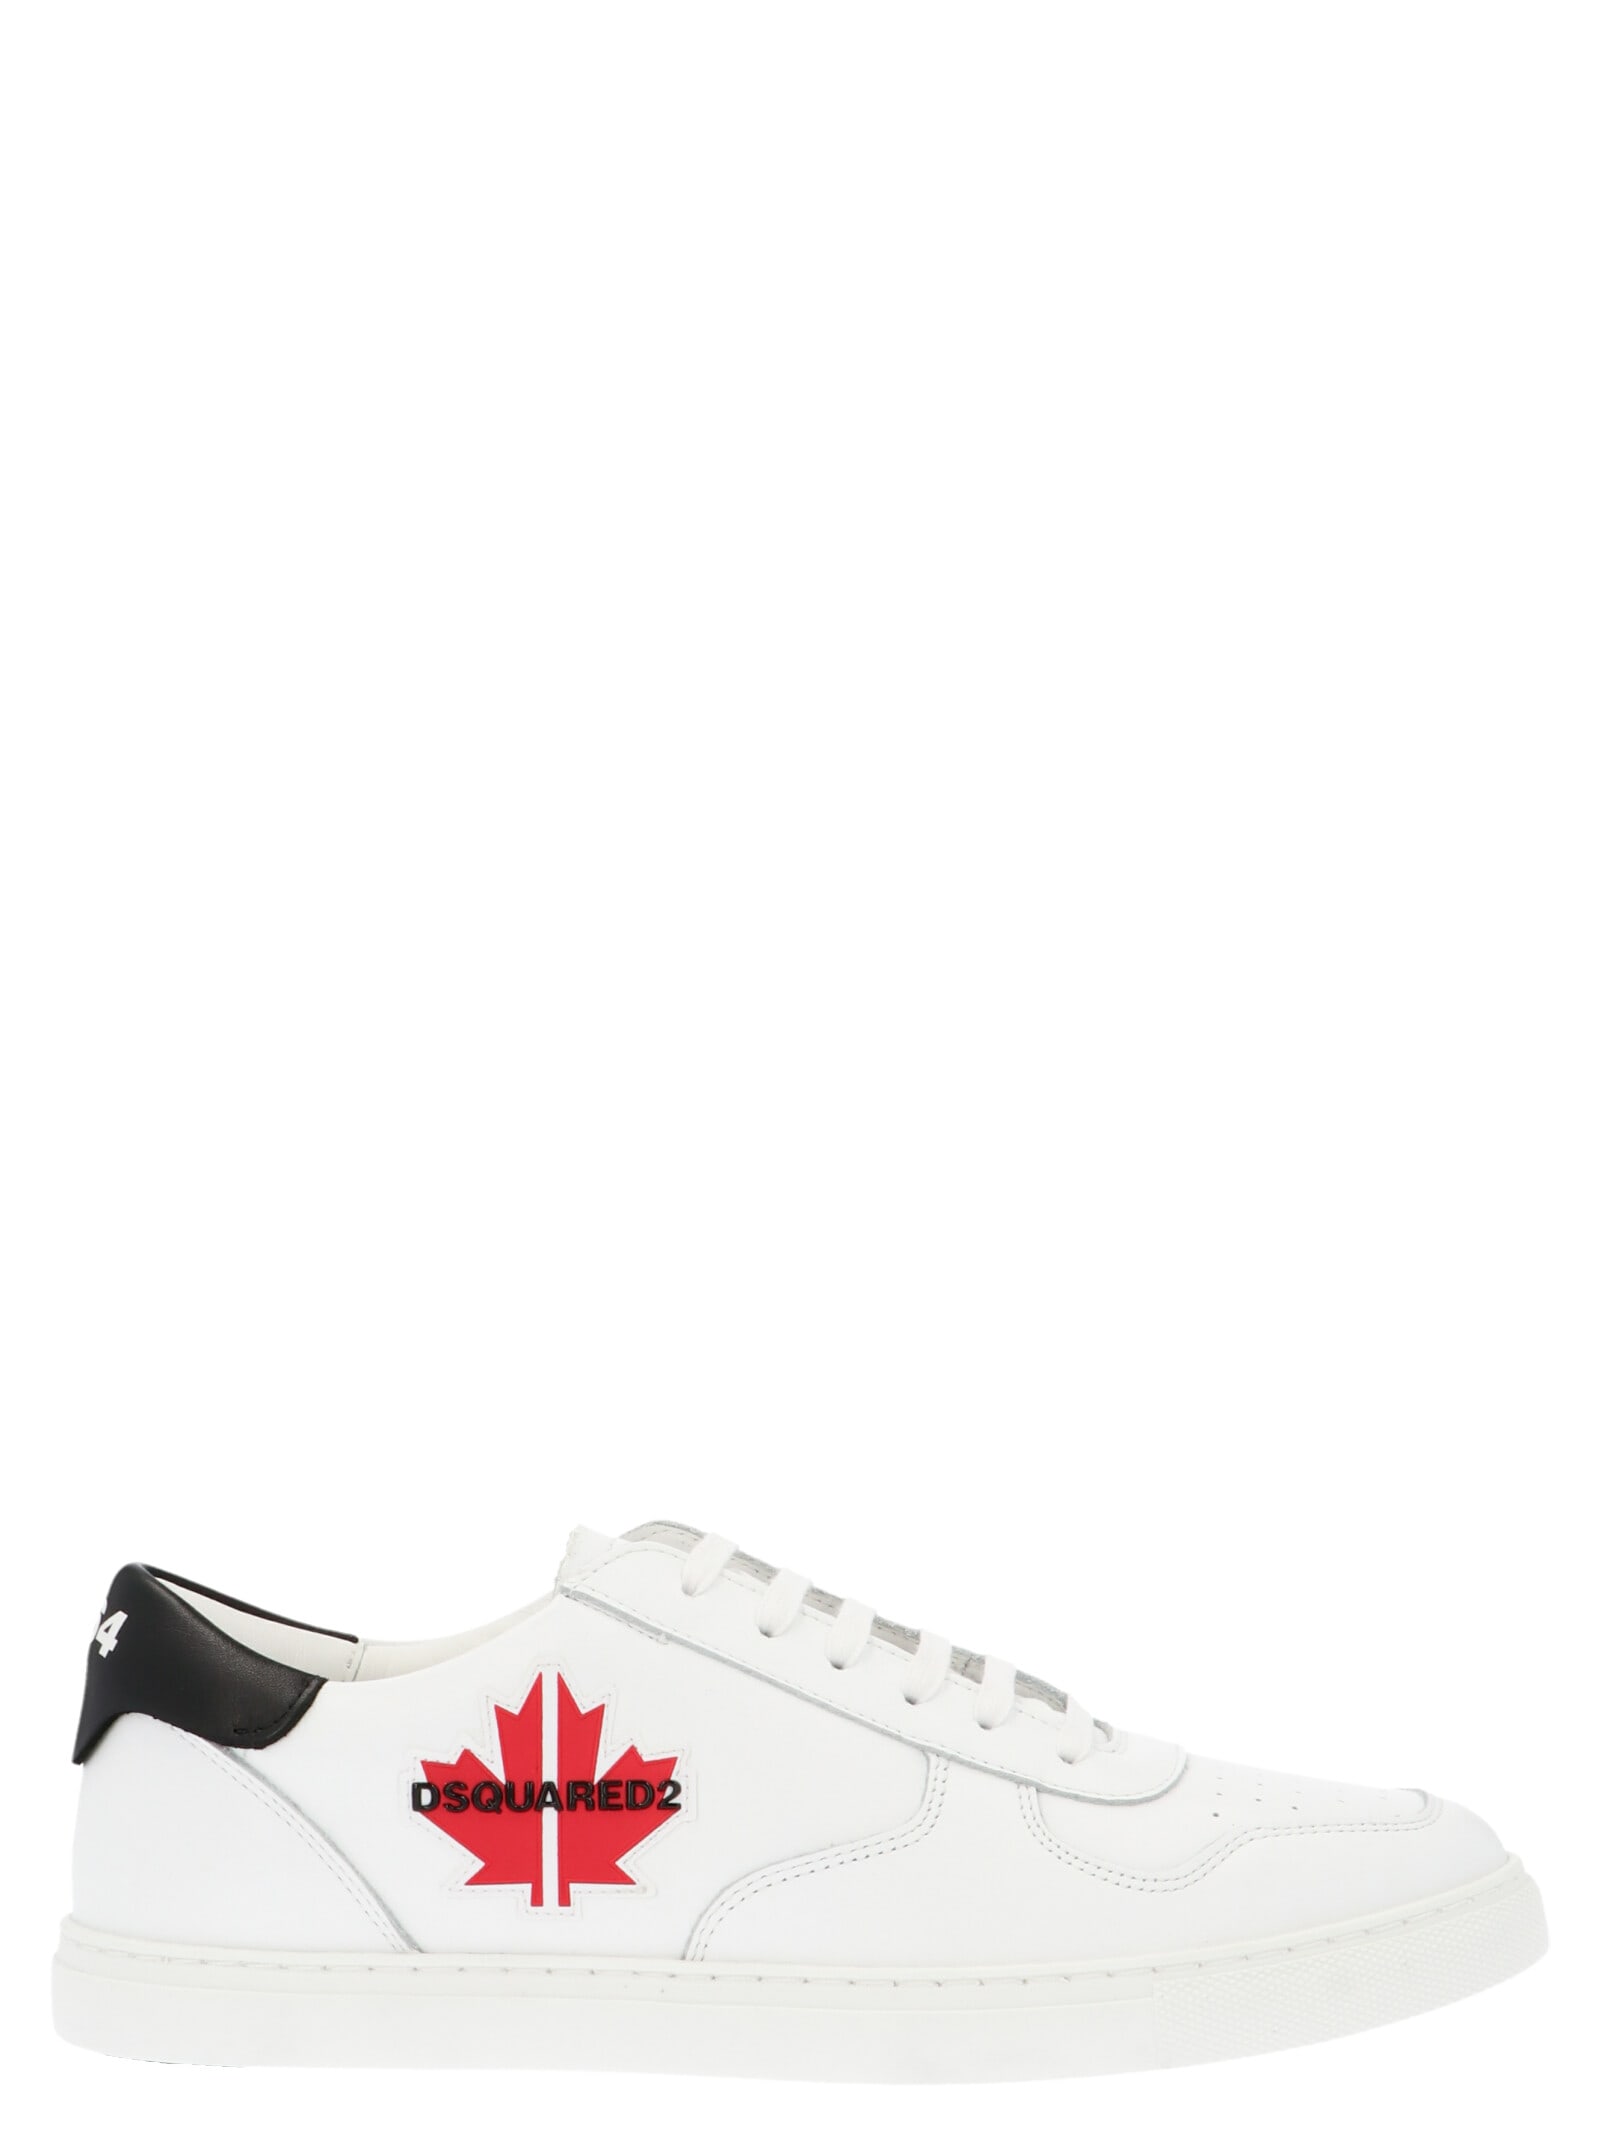 DSQUARED2 MAPLE GYM SHOES,11243104